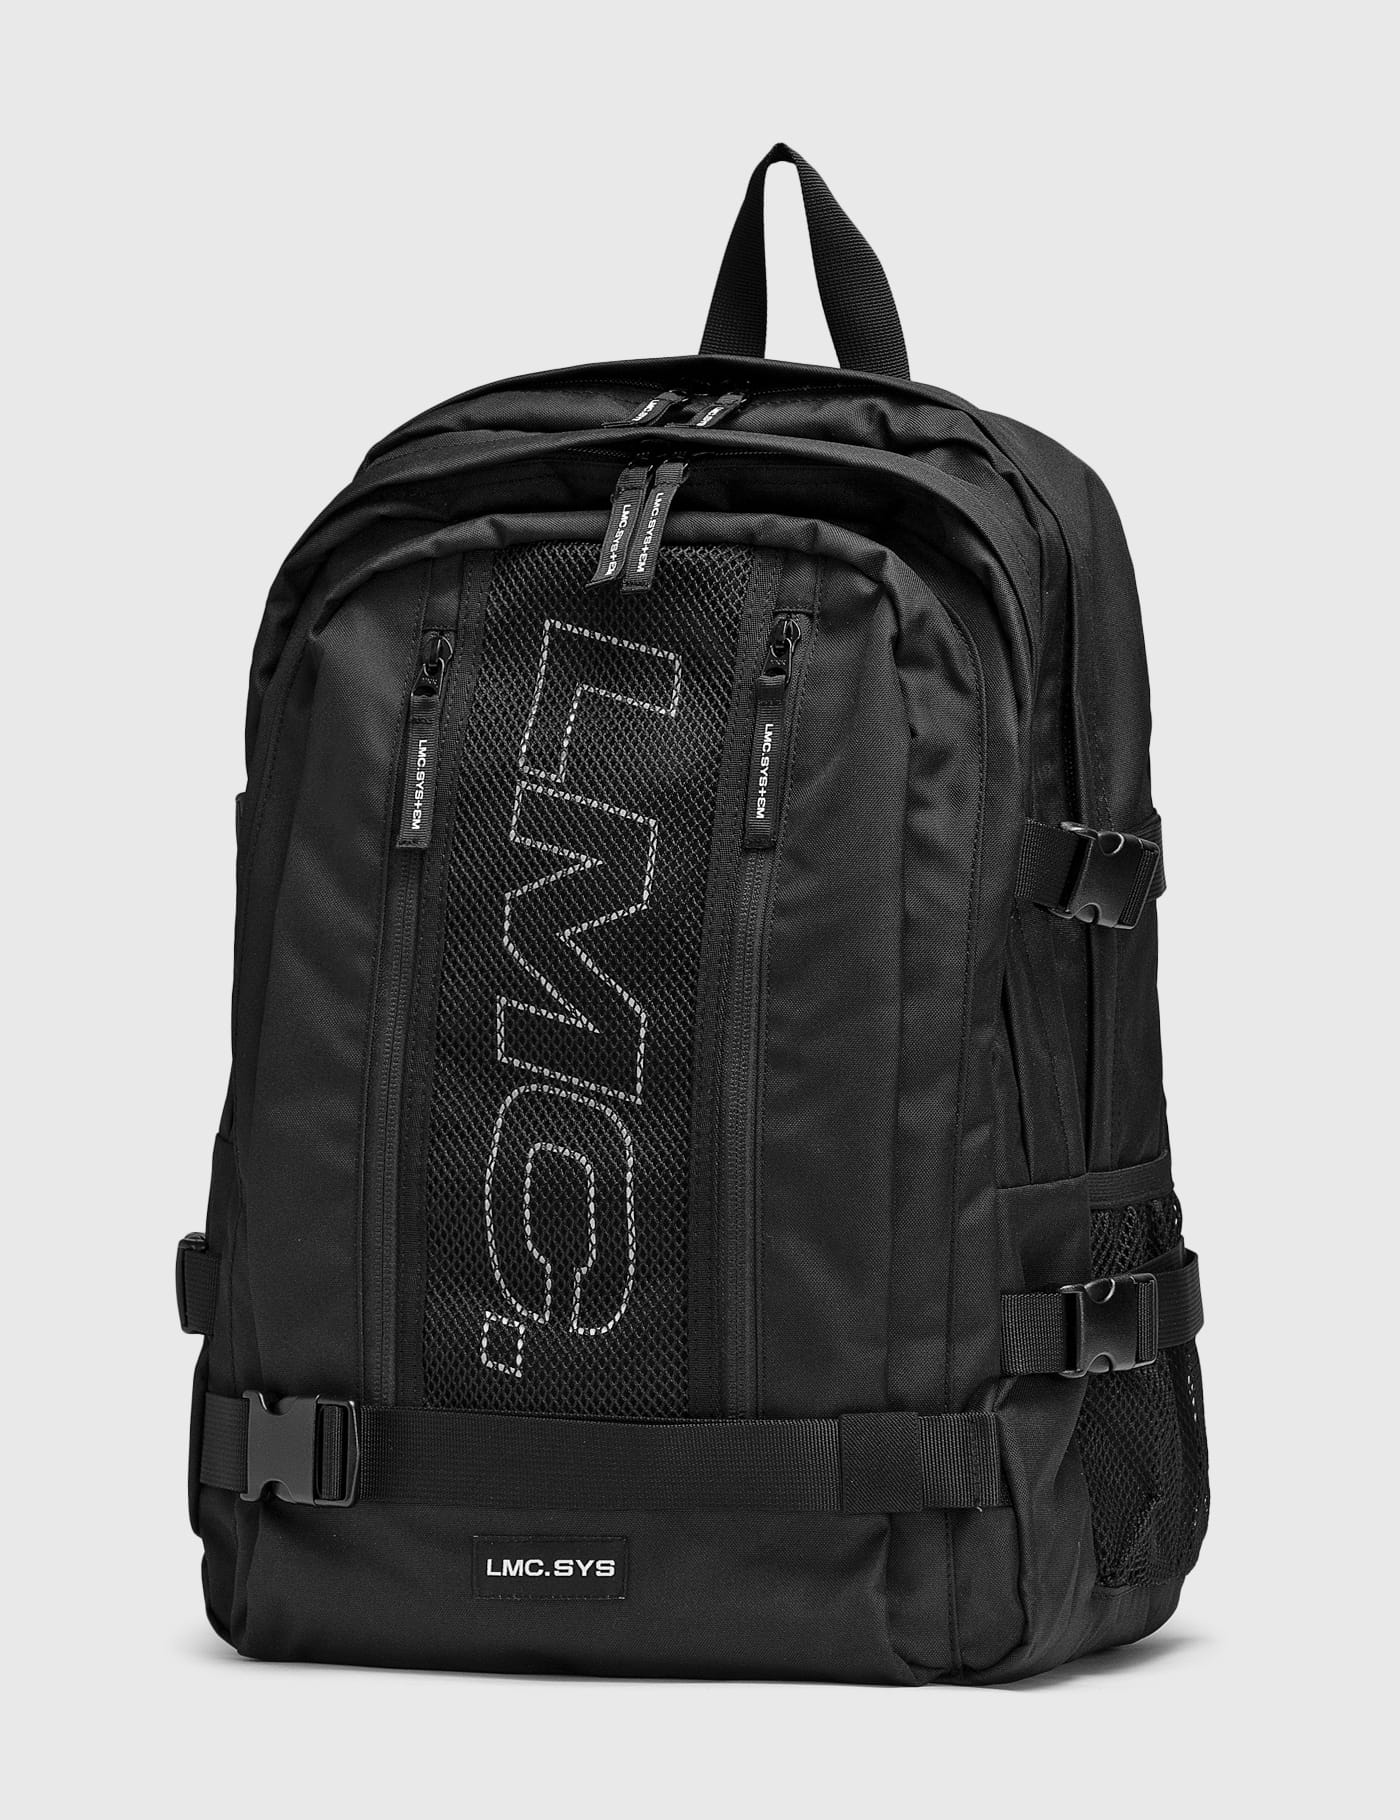 LMC - LMC System The Cove Backpack | HBX - Globally Curated